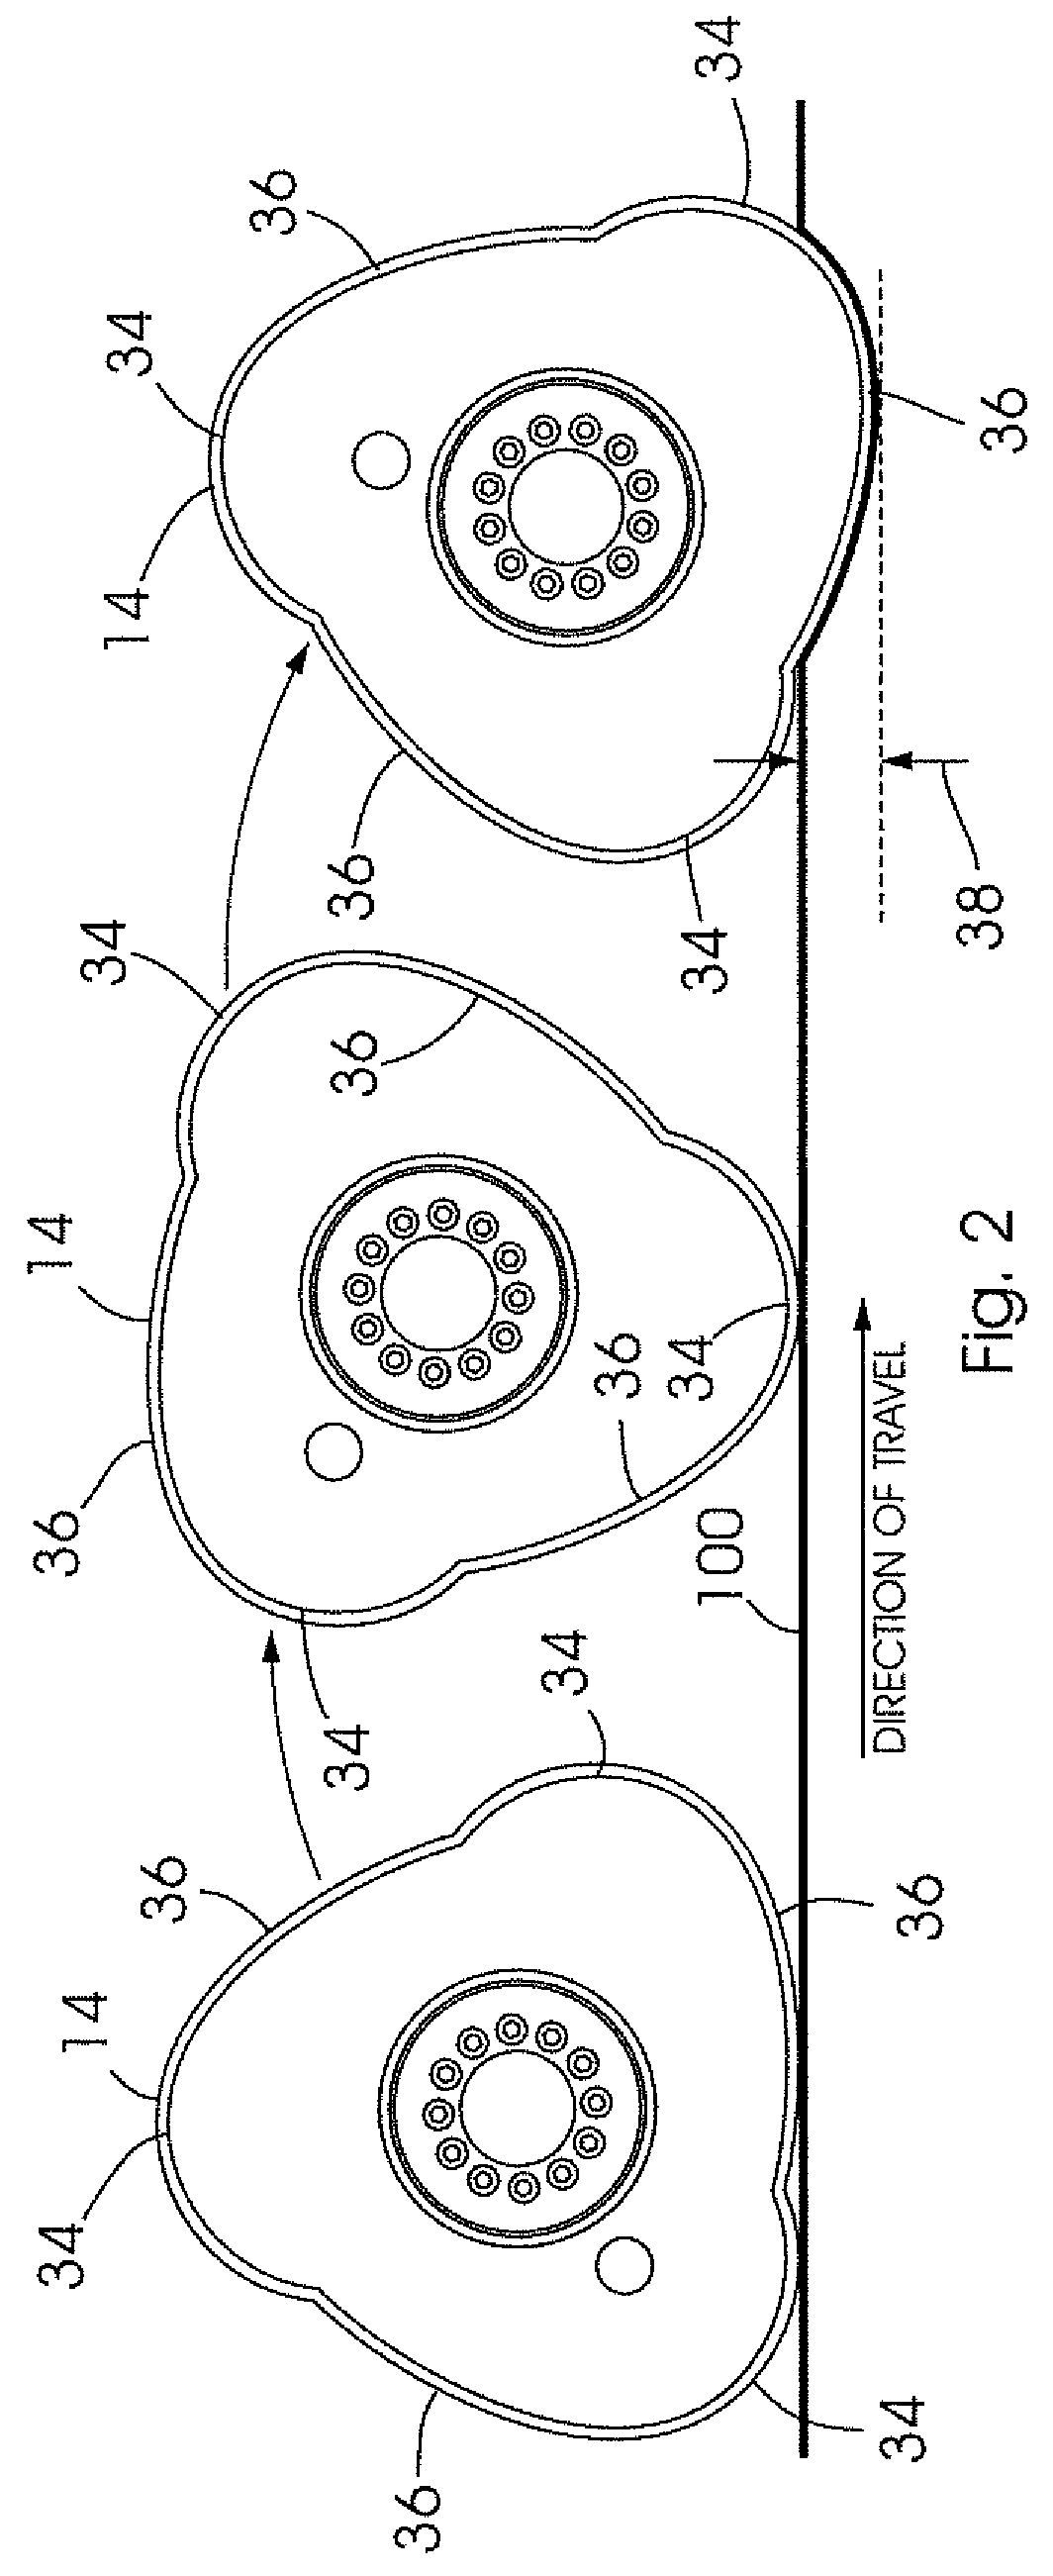 A soil compaction system and method